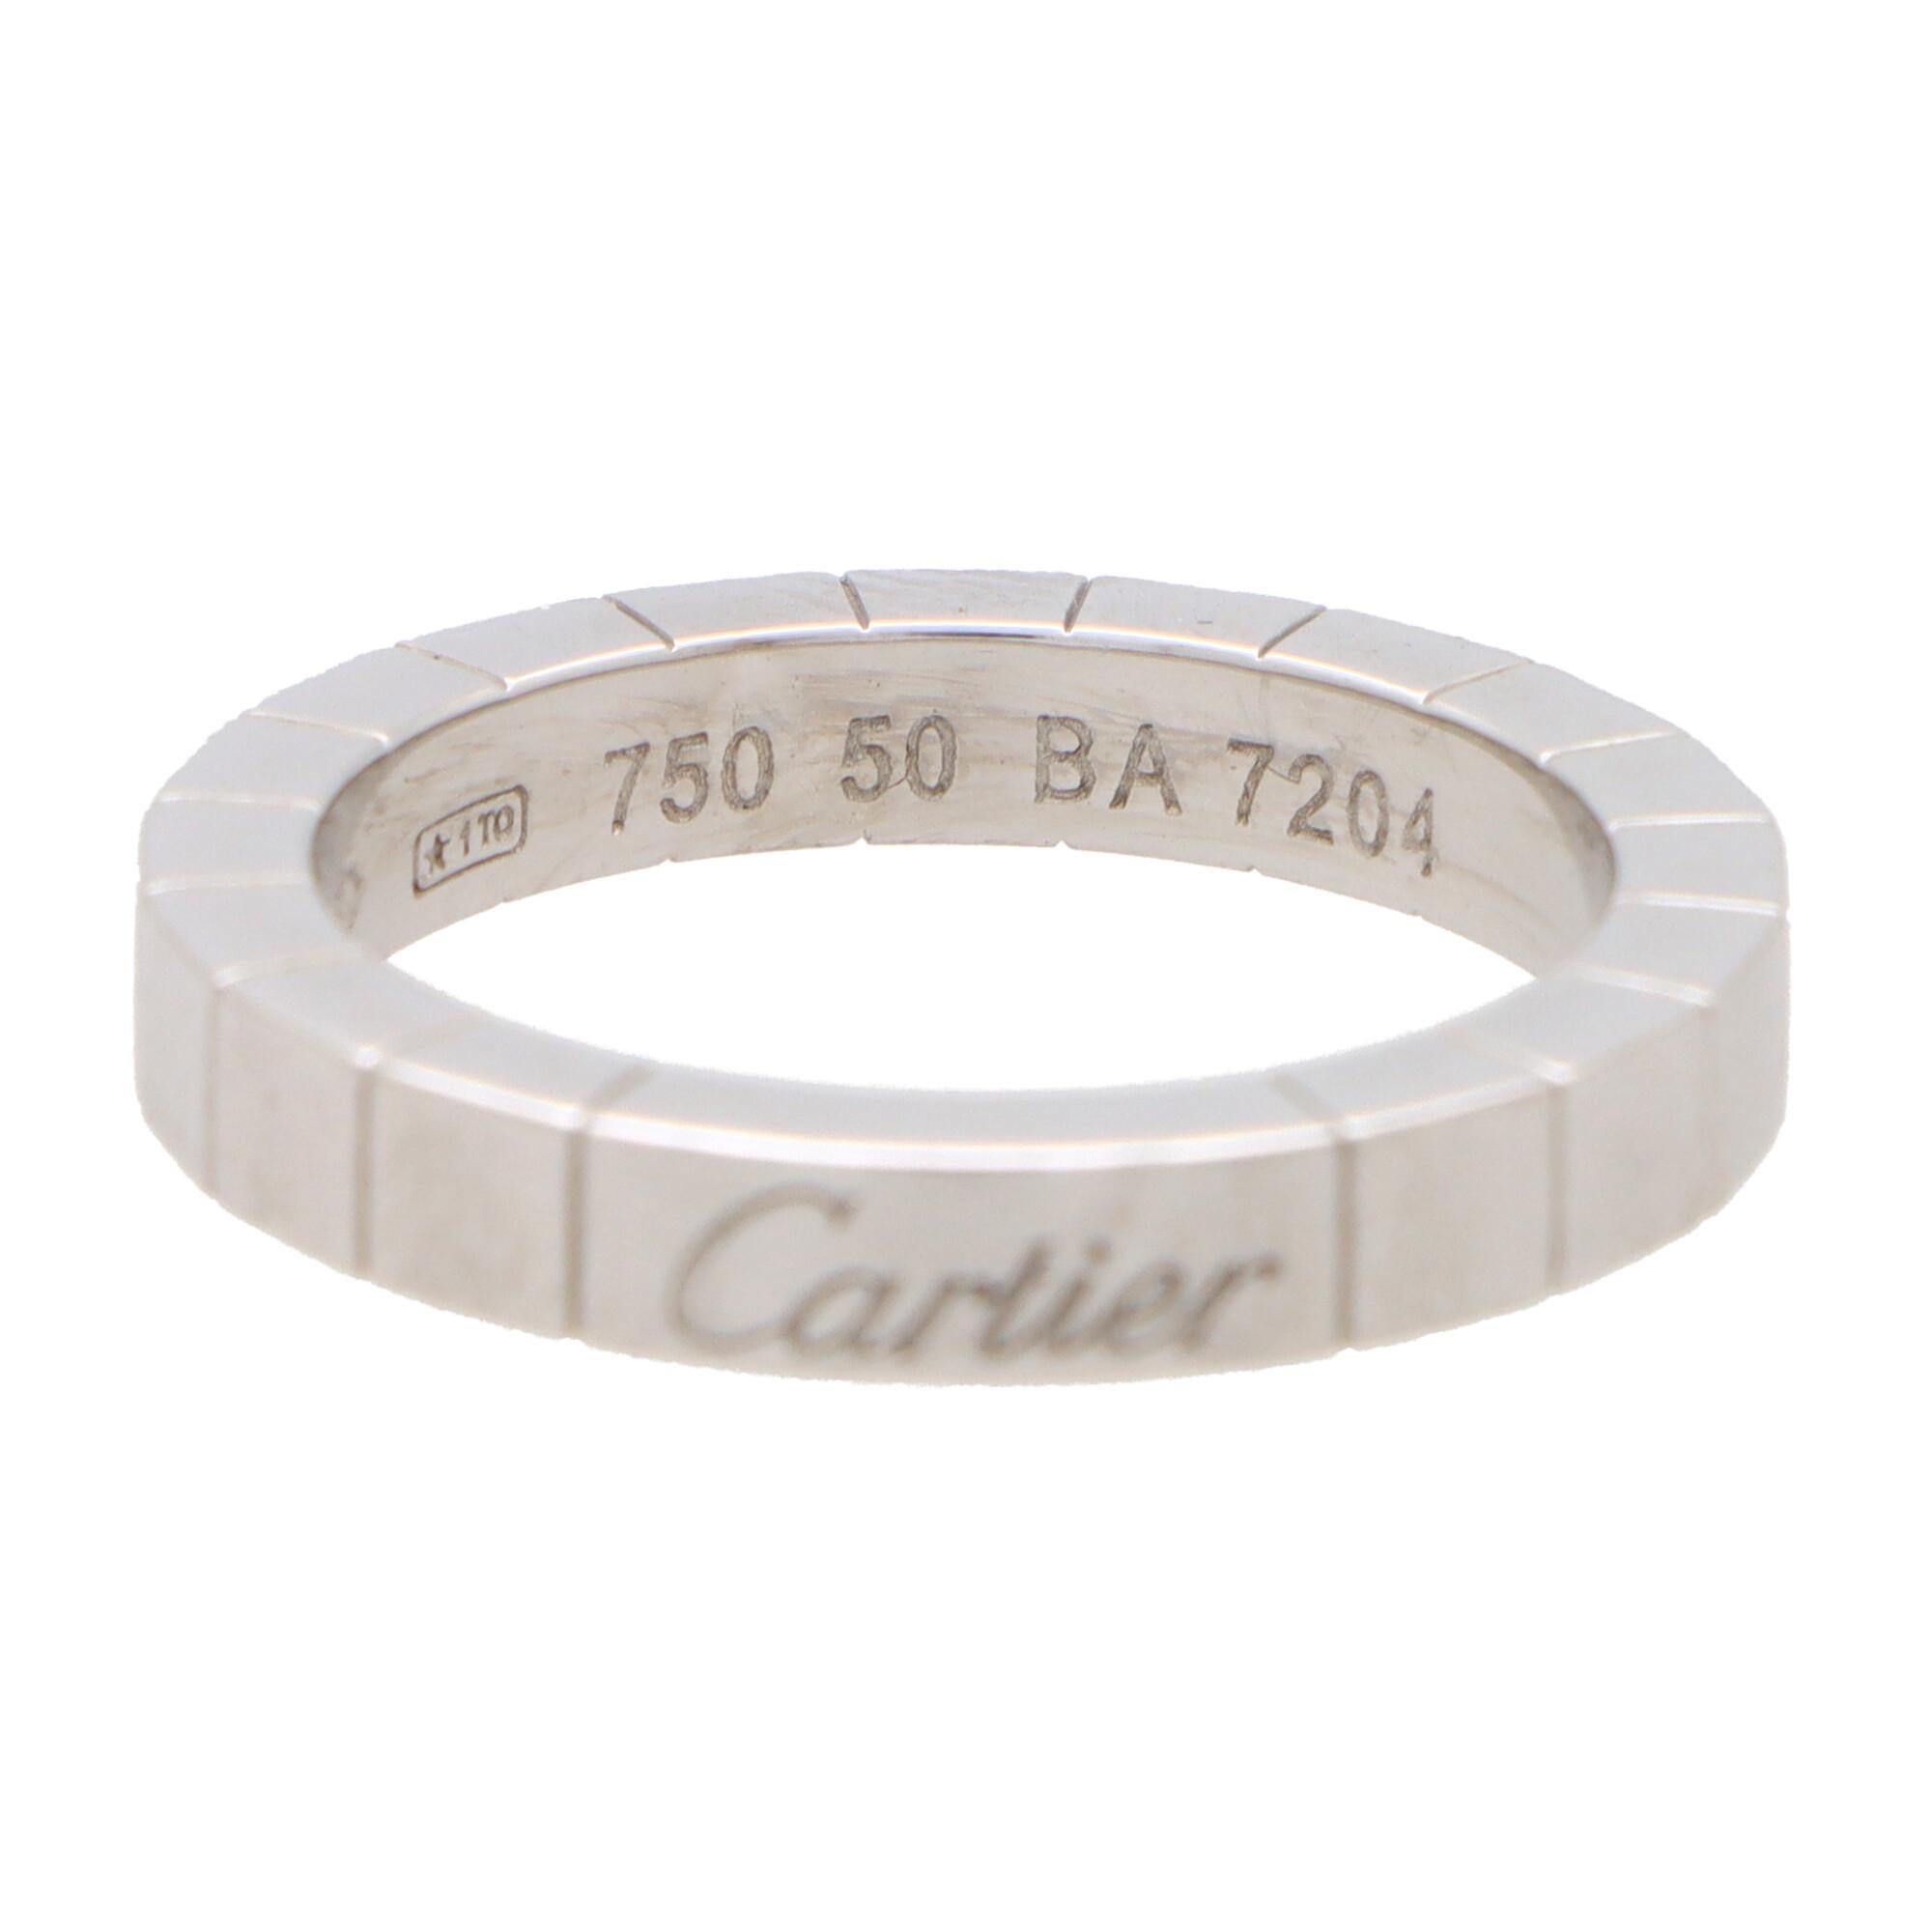  A stylish vintage Cartier Lanières ring set in 18k white gold.

The ring is composed in the iconic Cartier Lanières brick link design. Uniquely, to the opposite side of the band is the Cartier signature, which gives the wearer the option to wear